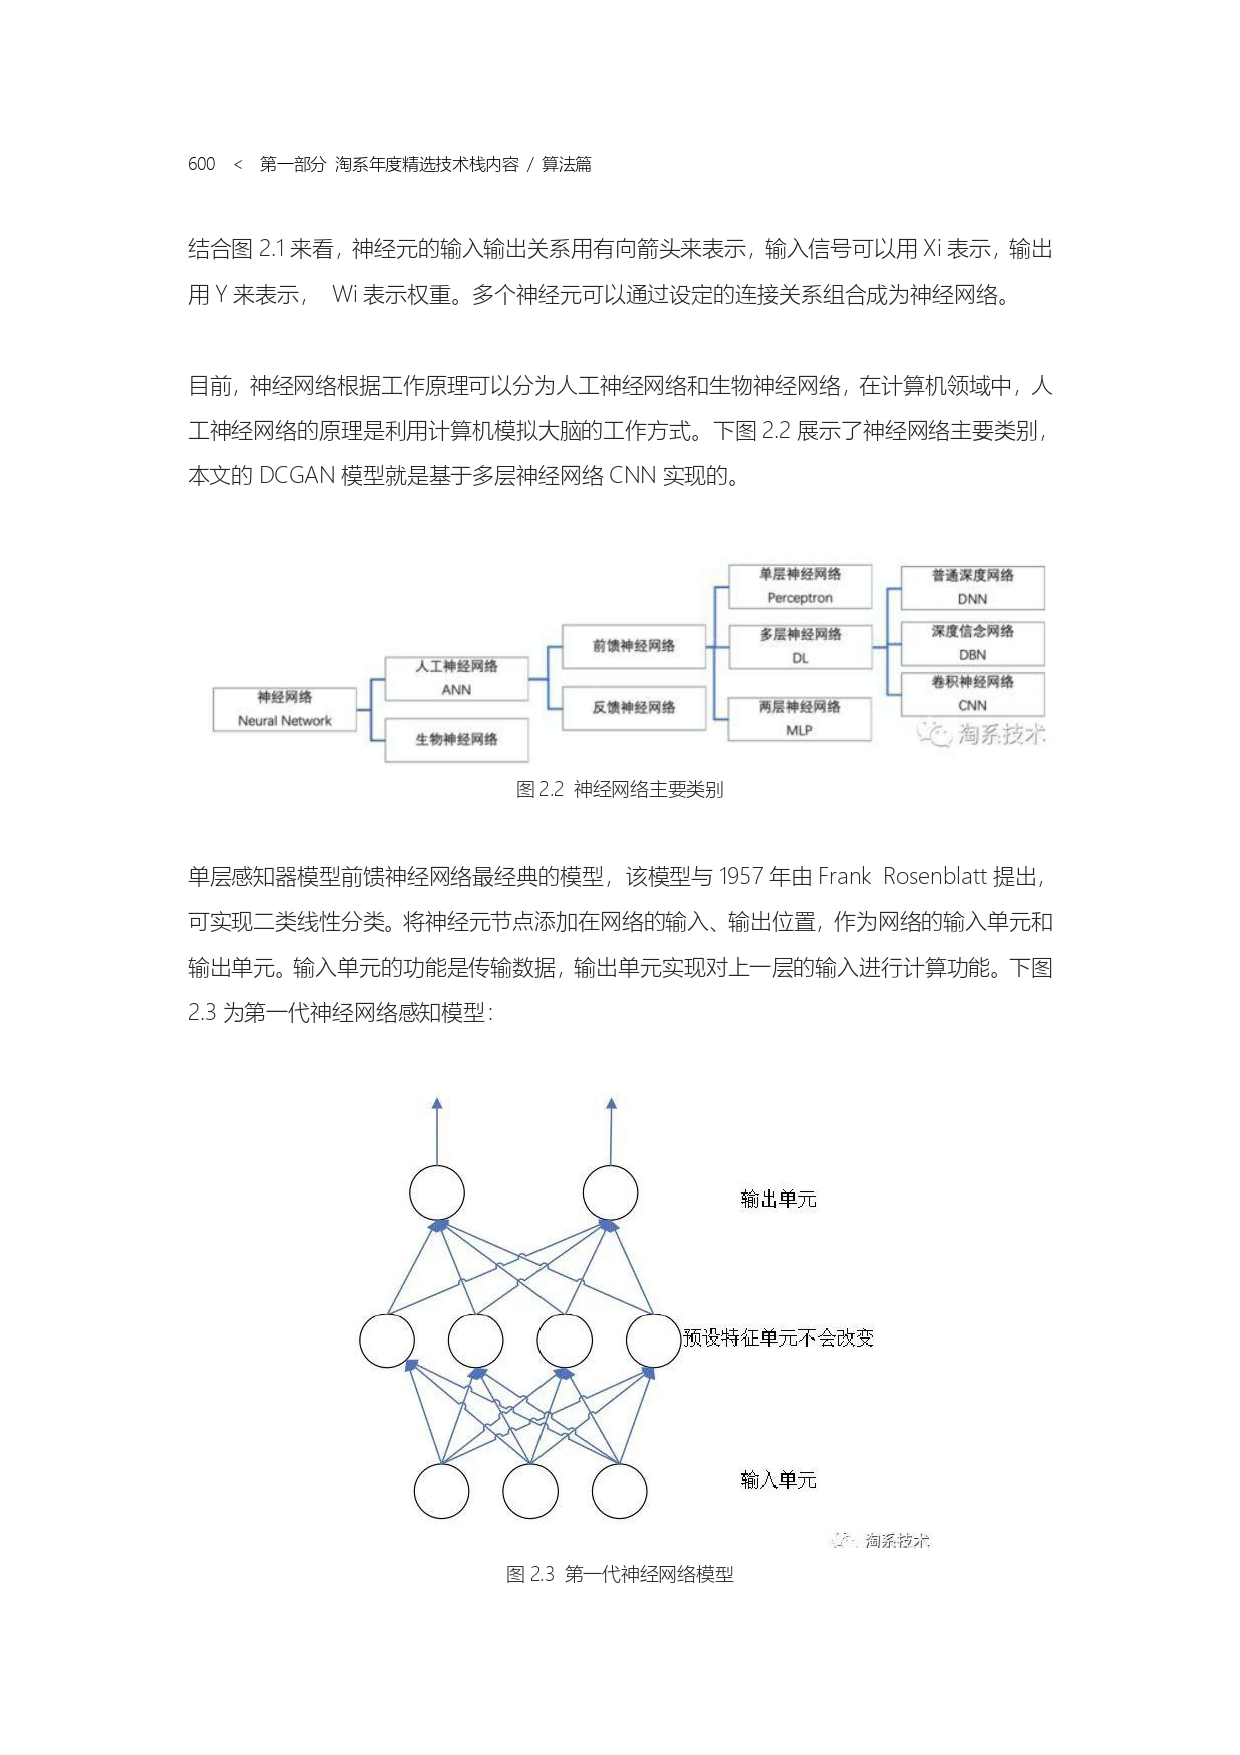 The Complete Works of Tao Technology 2020-571-1189-1-300_page-0030.jpg